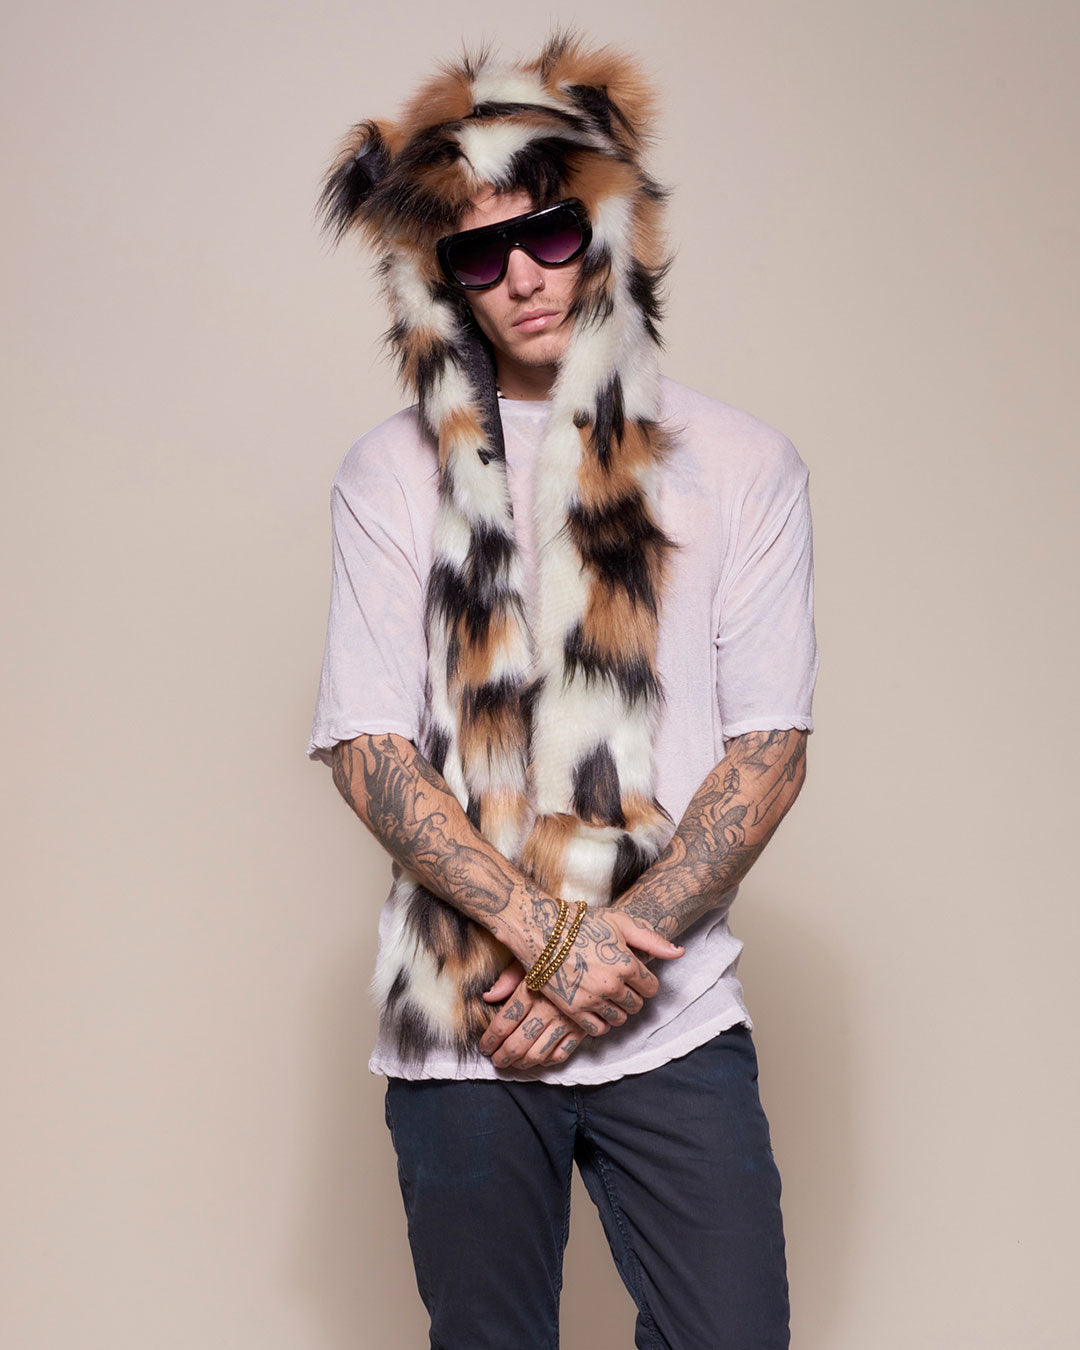 Man wearing Manx Cat Collector Edition Faux Fur Hood, front view